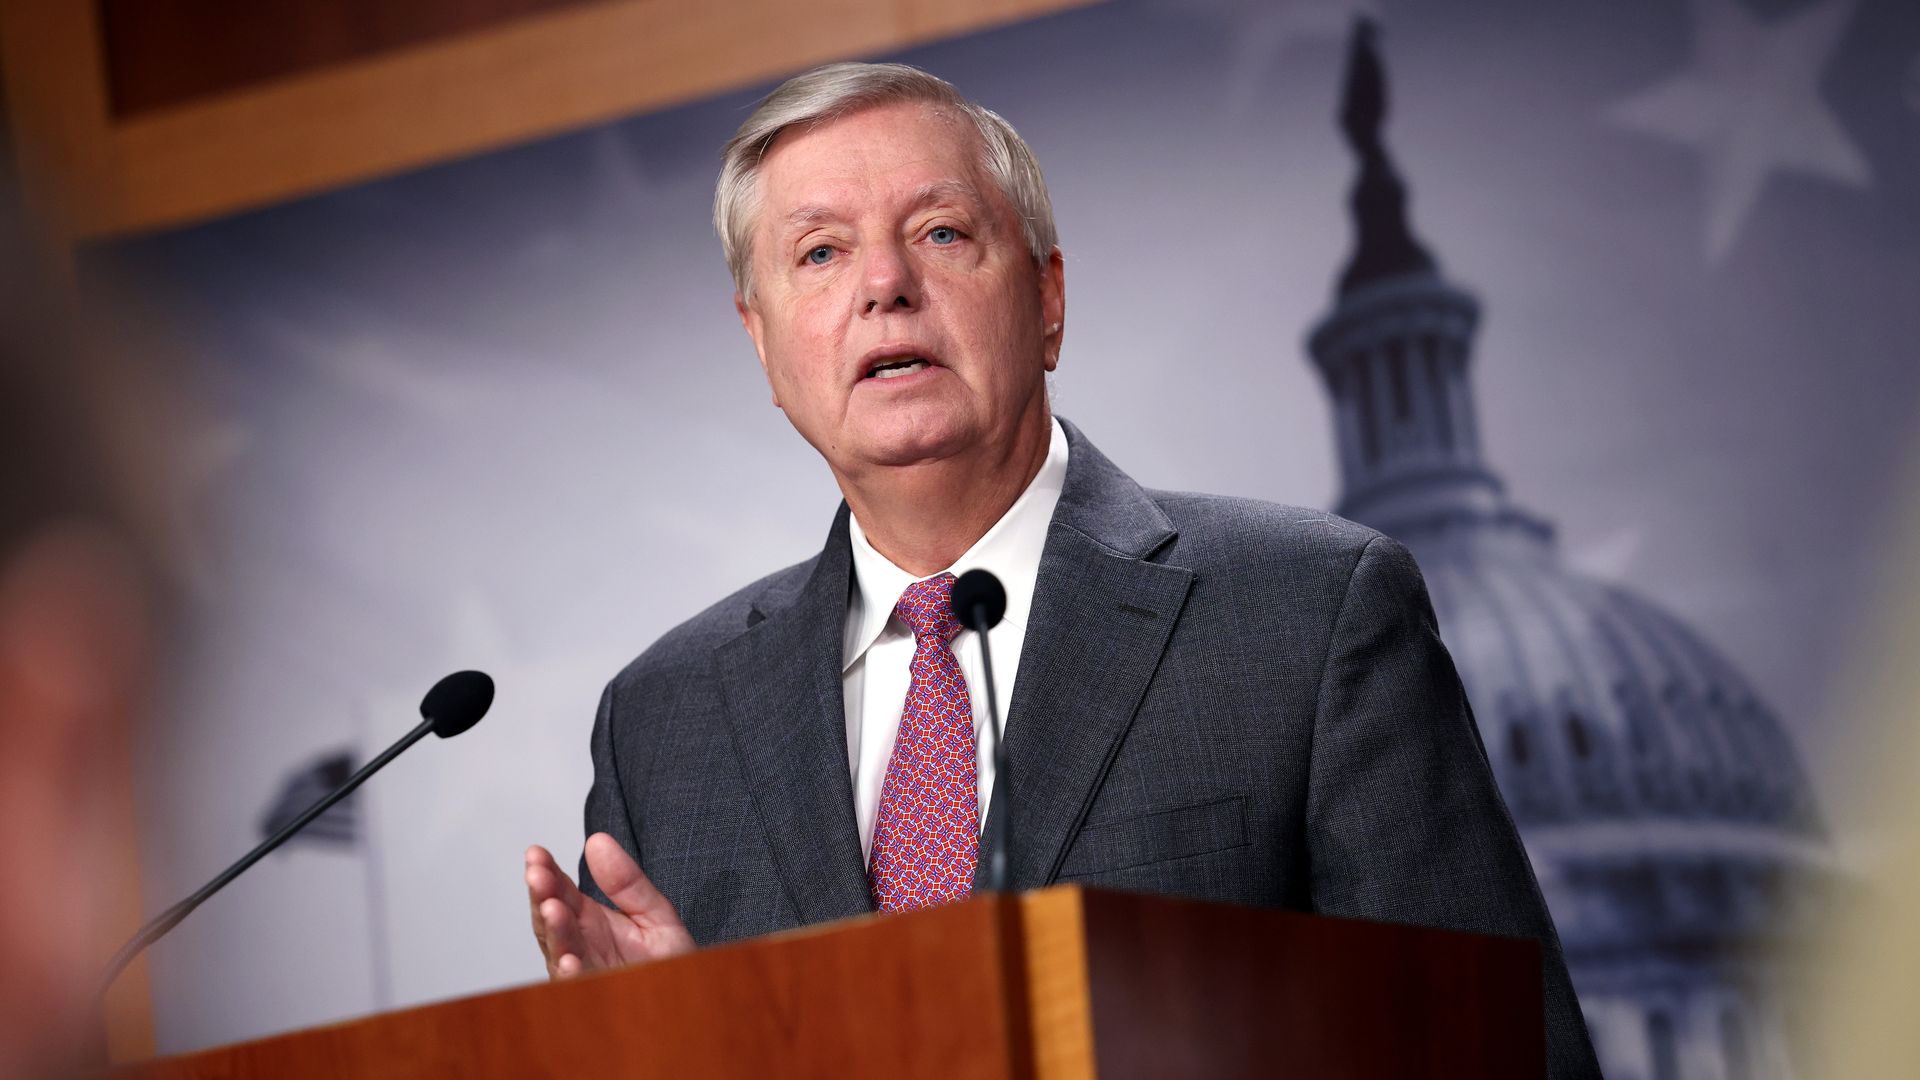  Sen. Lindsey Graham (R-SC) speaks during a news conference at the U.S. Capitol on July 30